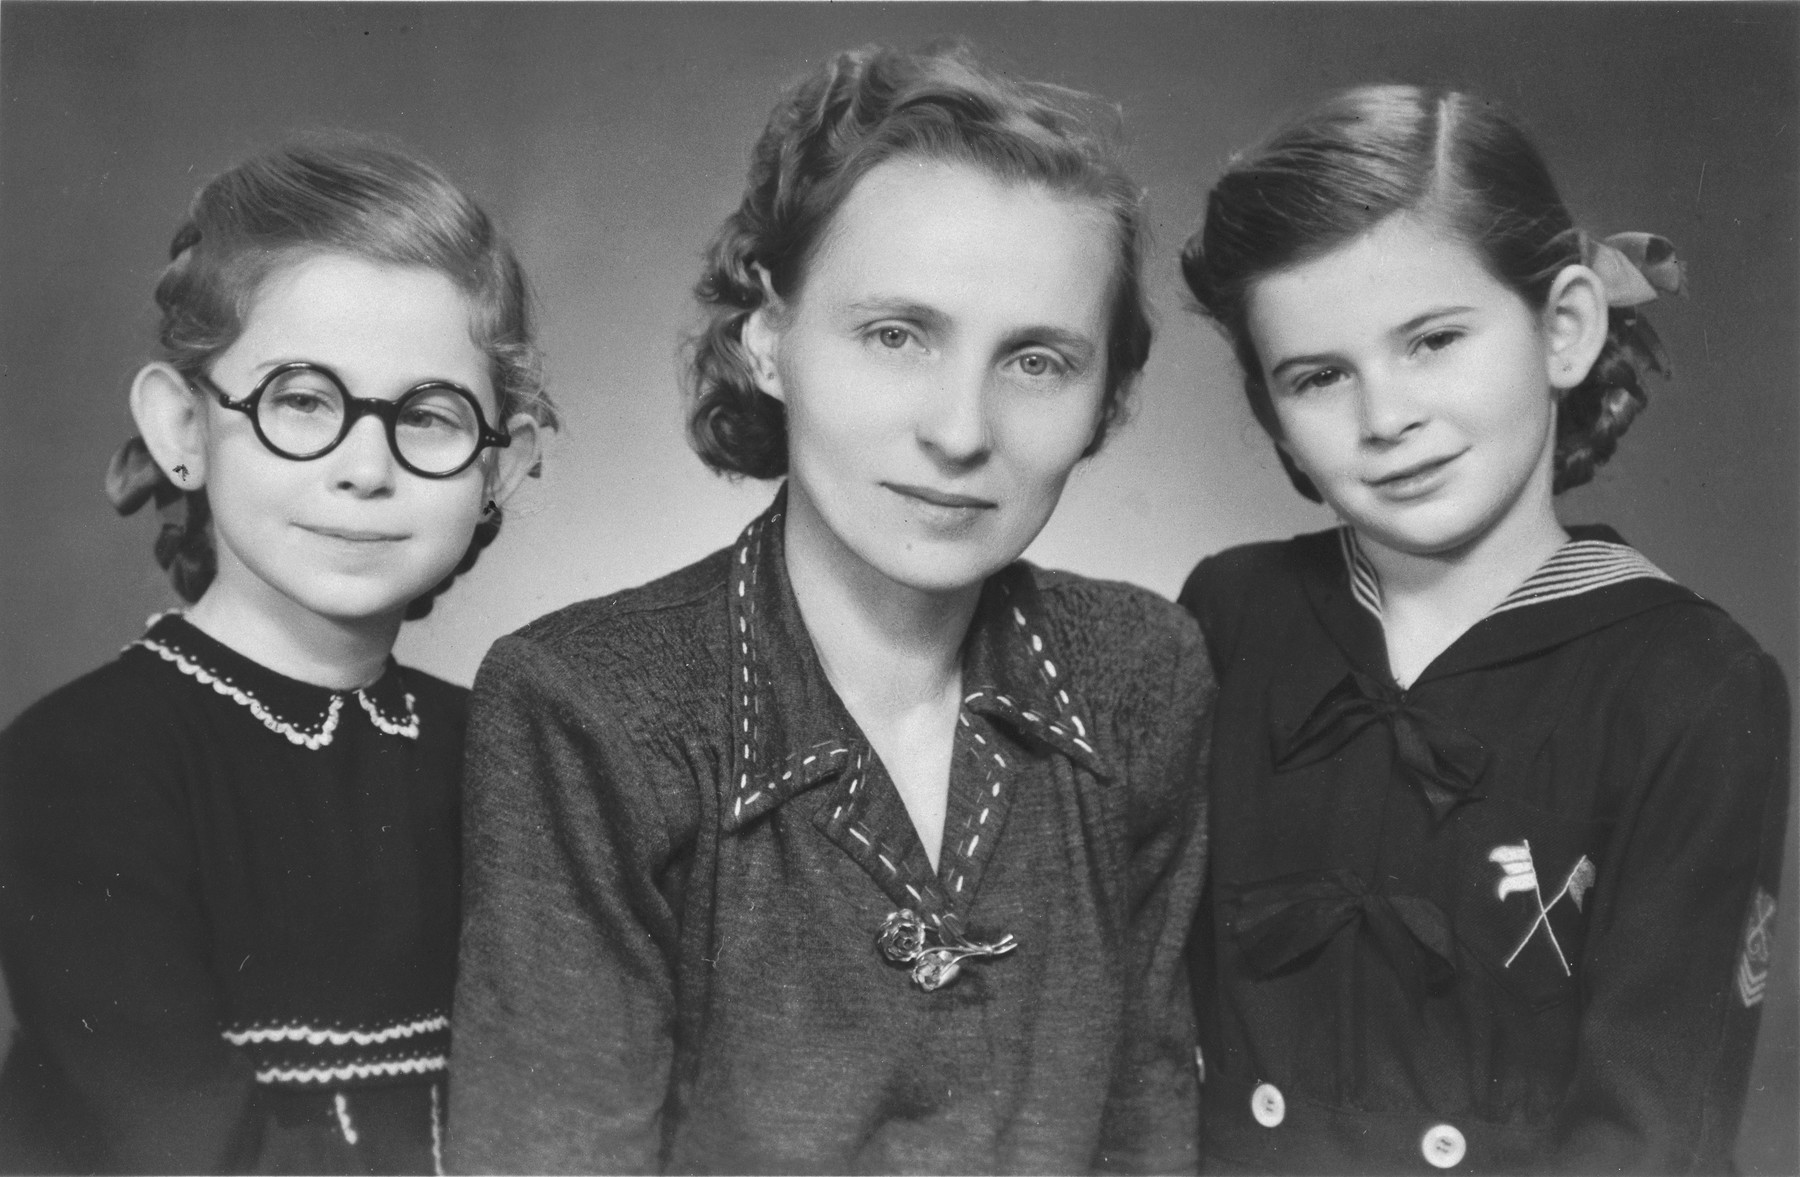 Studio portrait of two Jewish sisters with their rescuer after the war.

Pictured are Renate (right) and Sylvia Schonberg (left) with their nanny and rescuer, Frantiska Prva.